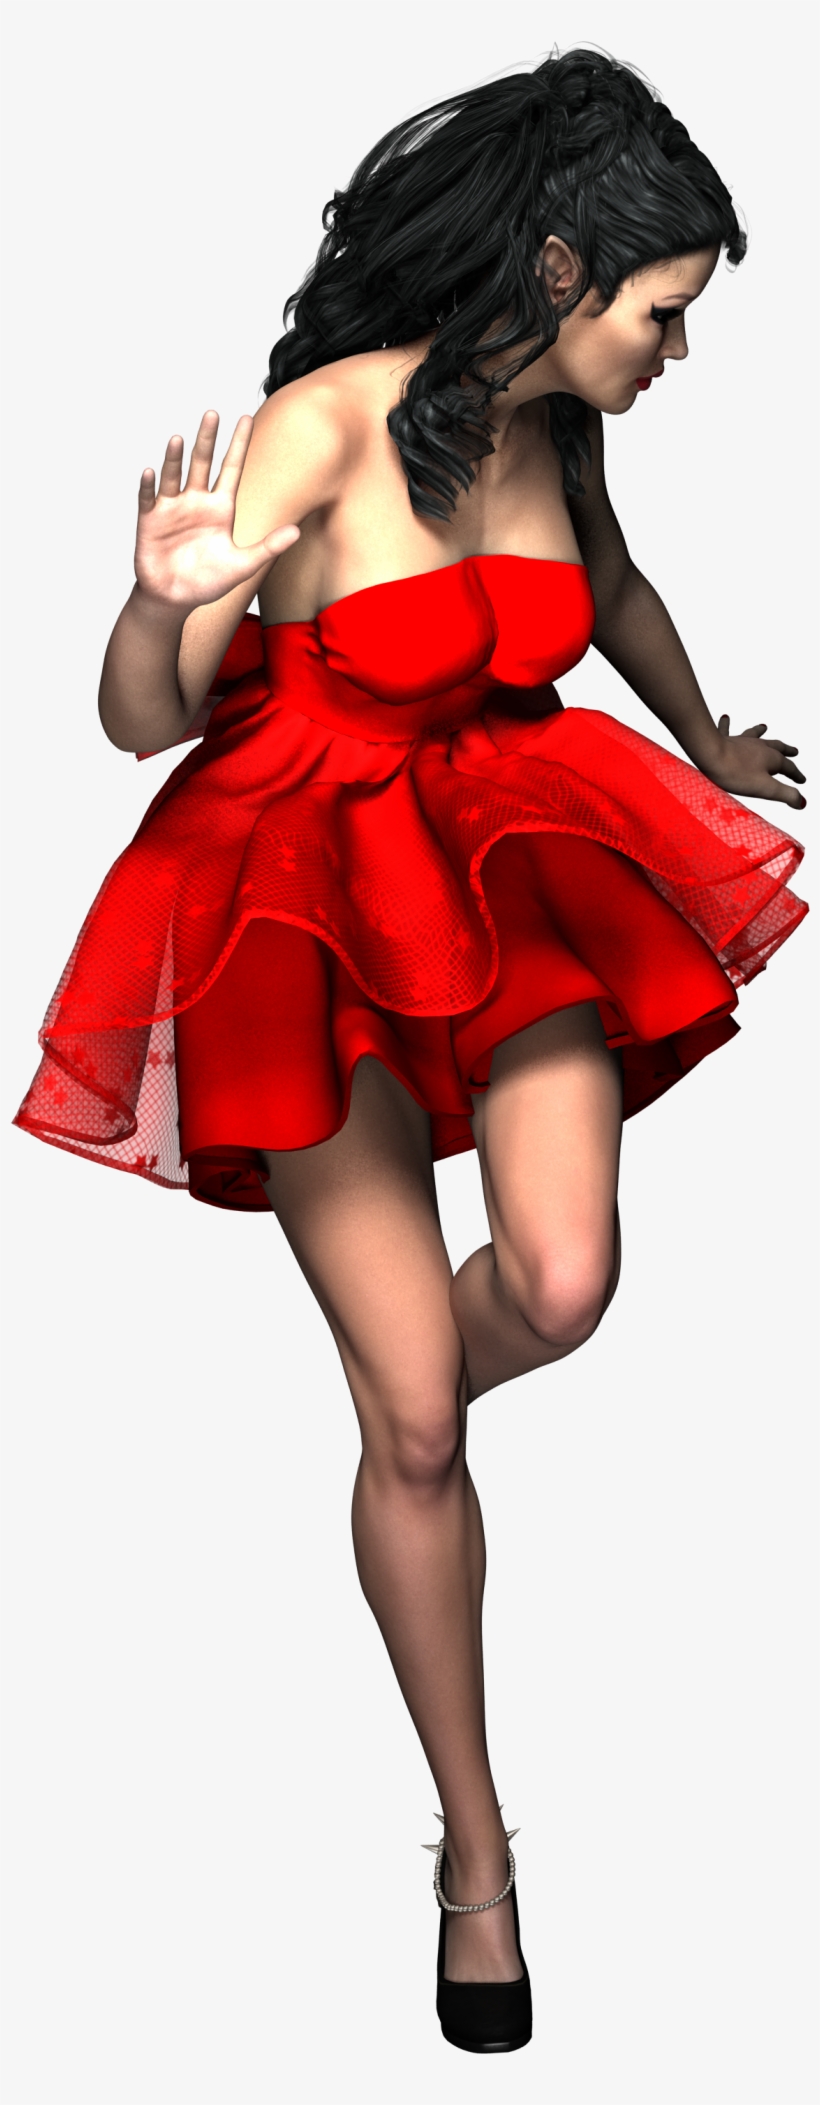 Lady Elf Red Dress Girl Woman 1073734 - Woman In Red Dress Png, transparent png #2602705